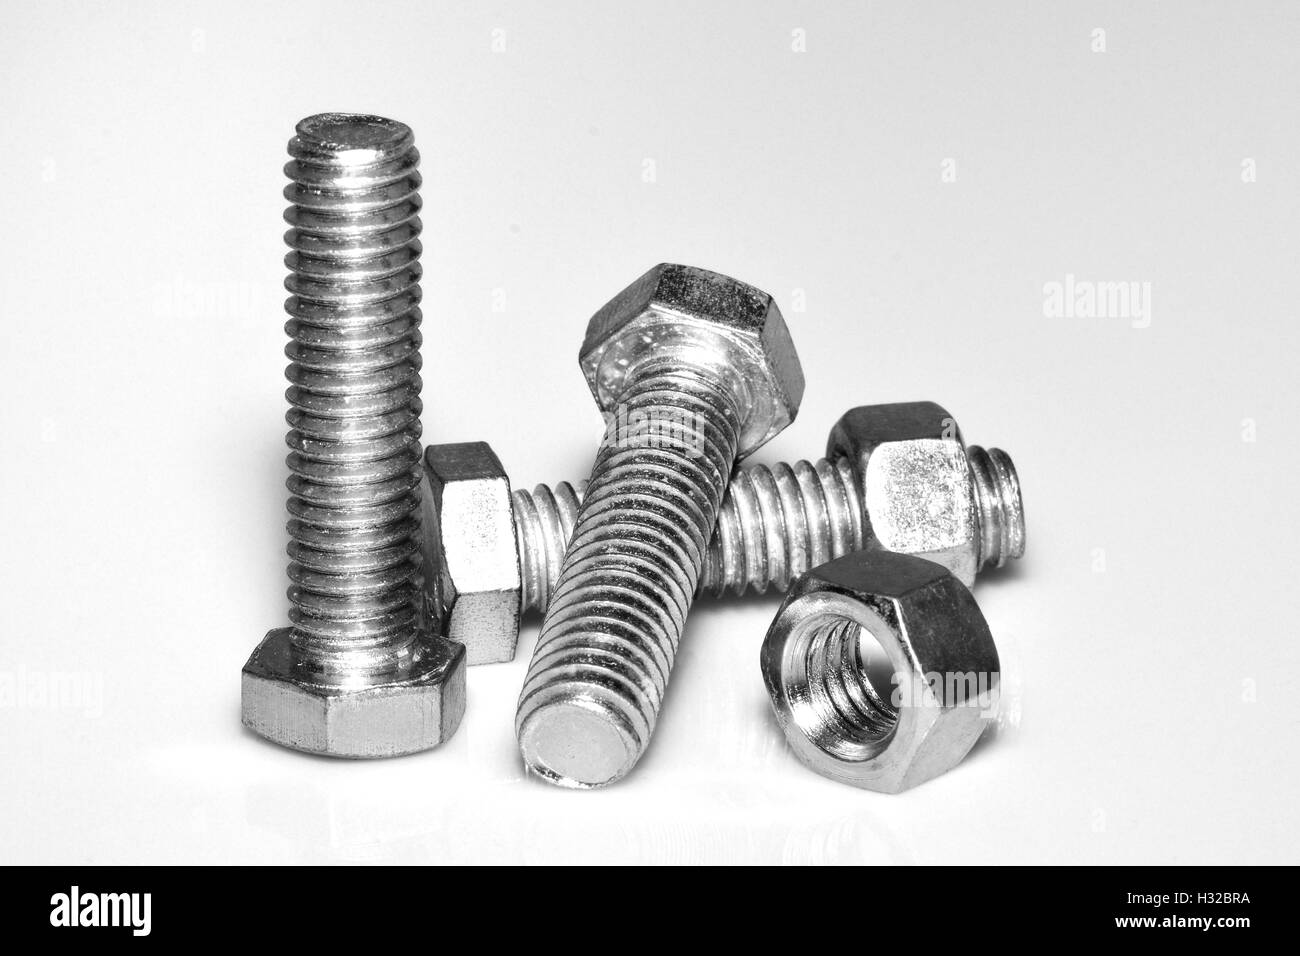 Steel bolts and nuts on white background close-up. B&W Stock Photo